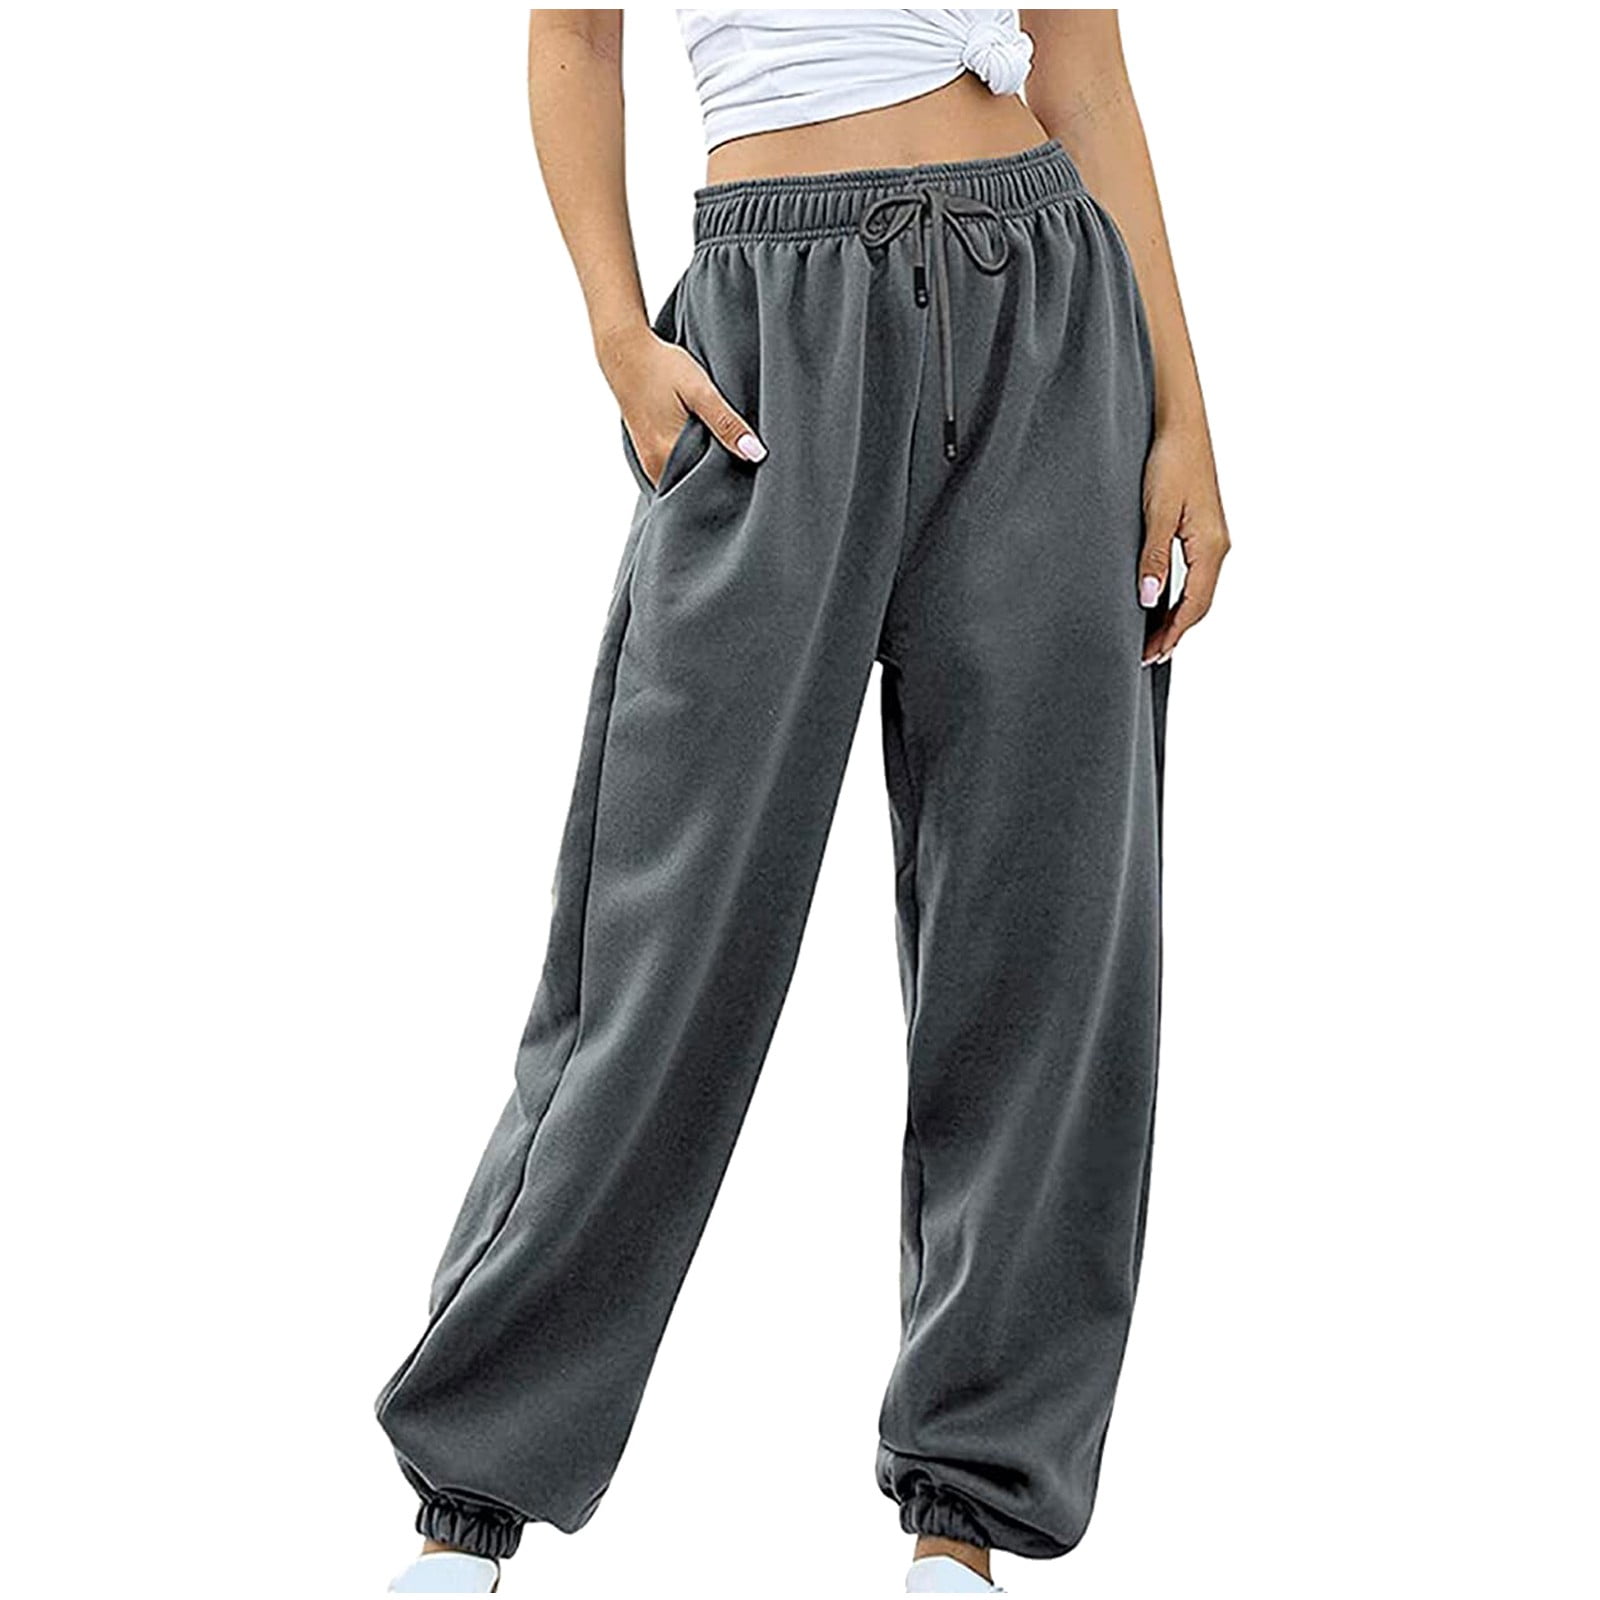 HSMQHJWE Womens Joggers Loose Lightweight Yoga Sweatpants Drawstring  Workout Jogging Pant Casual Soft Lounge Pants with Pockets 